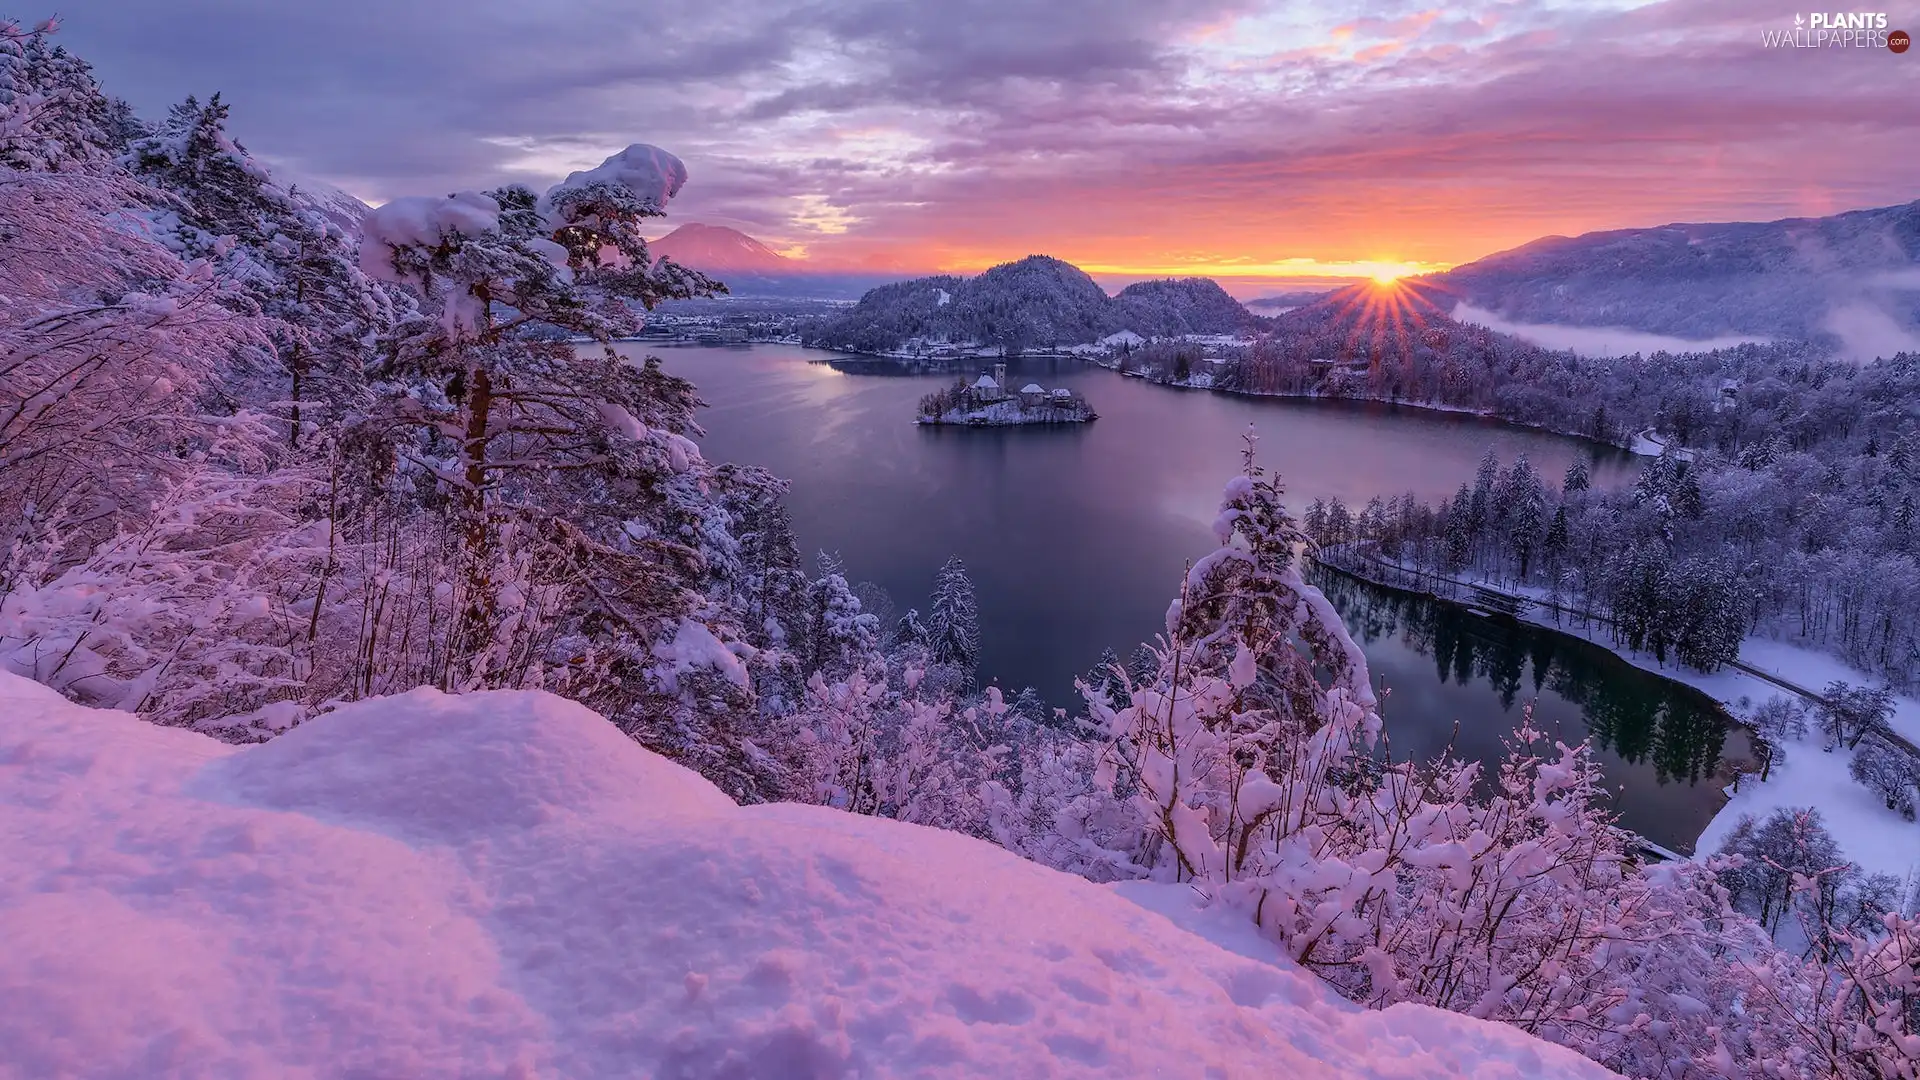 trees, snow, Slovenia, Snowy, Lake Bled, winter, Mountains, rays of the Sun, viewes, Islet